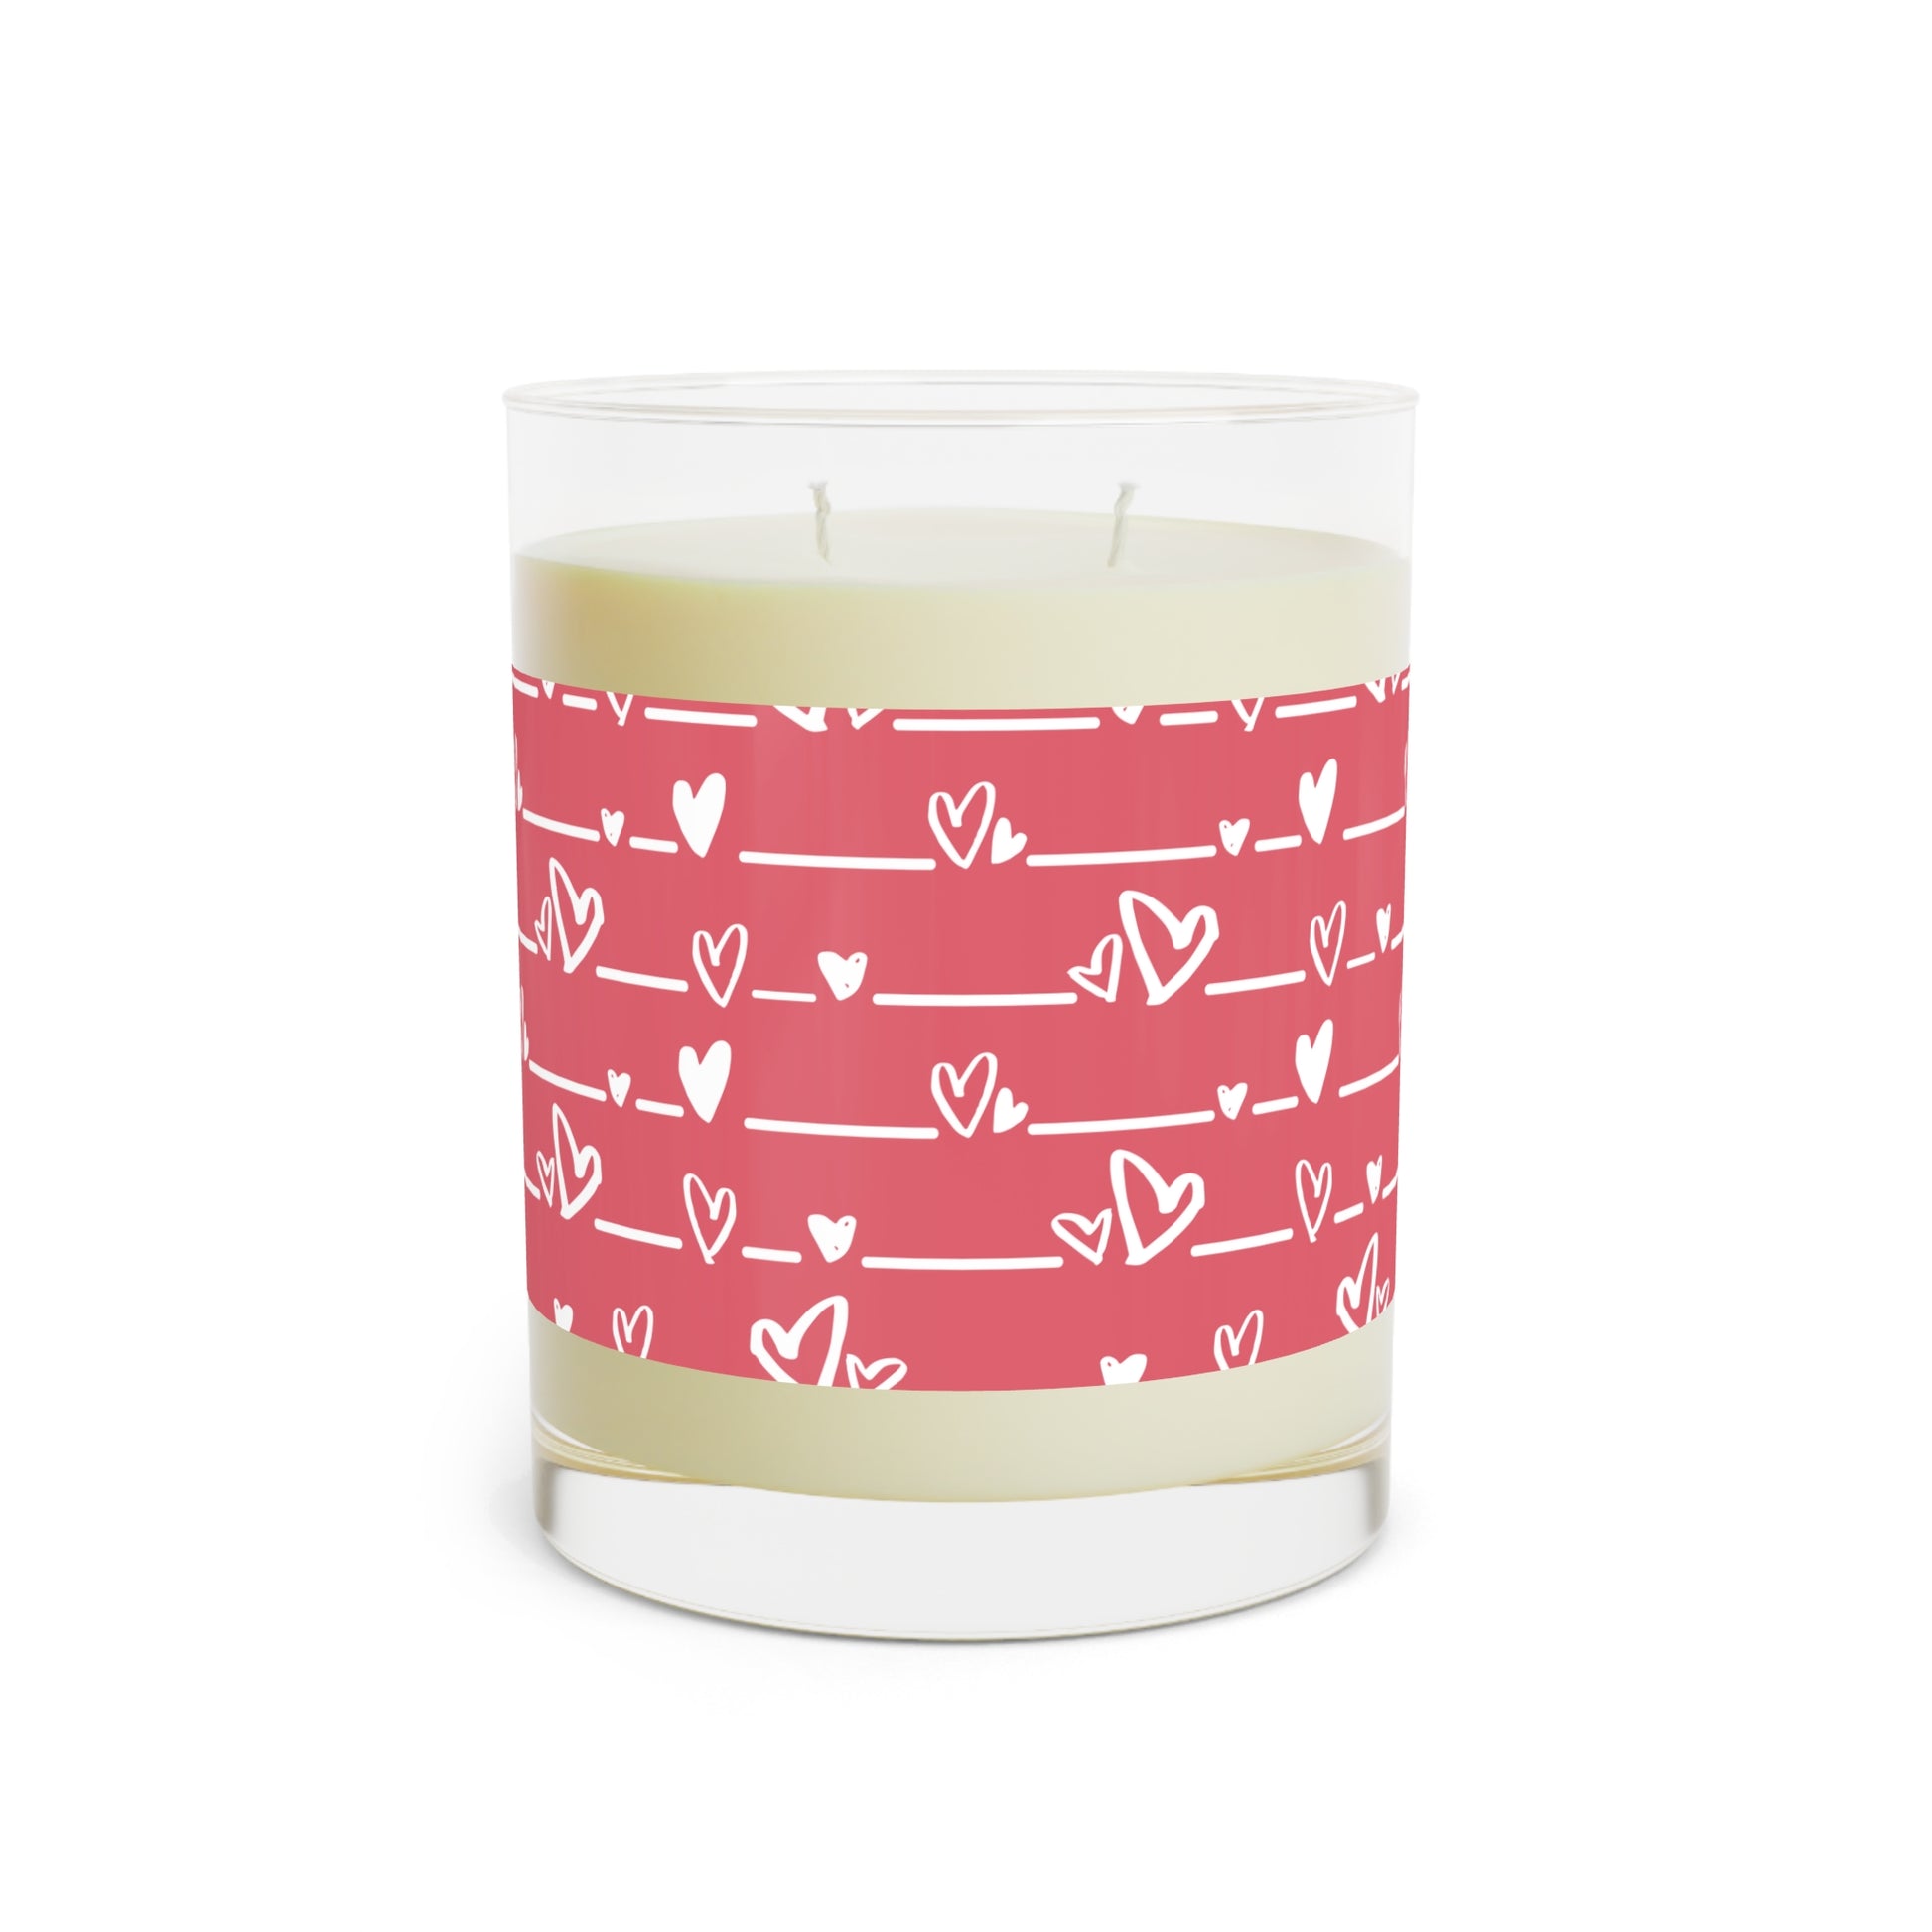 Heart Design Scented Soy Wax Aromatherapy Candle